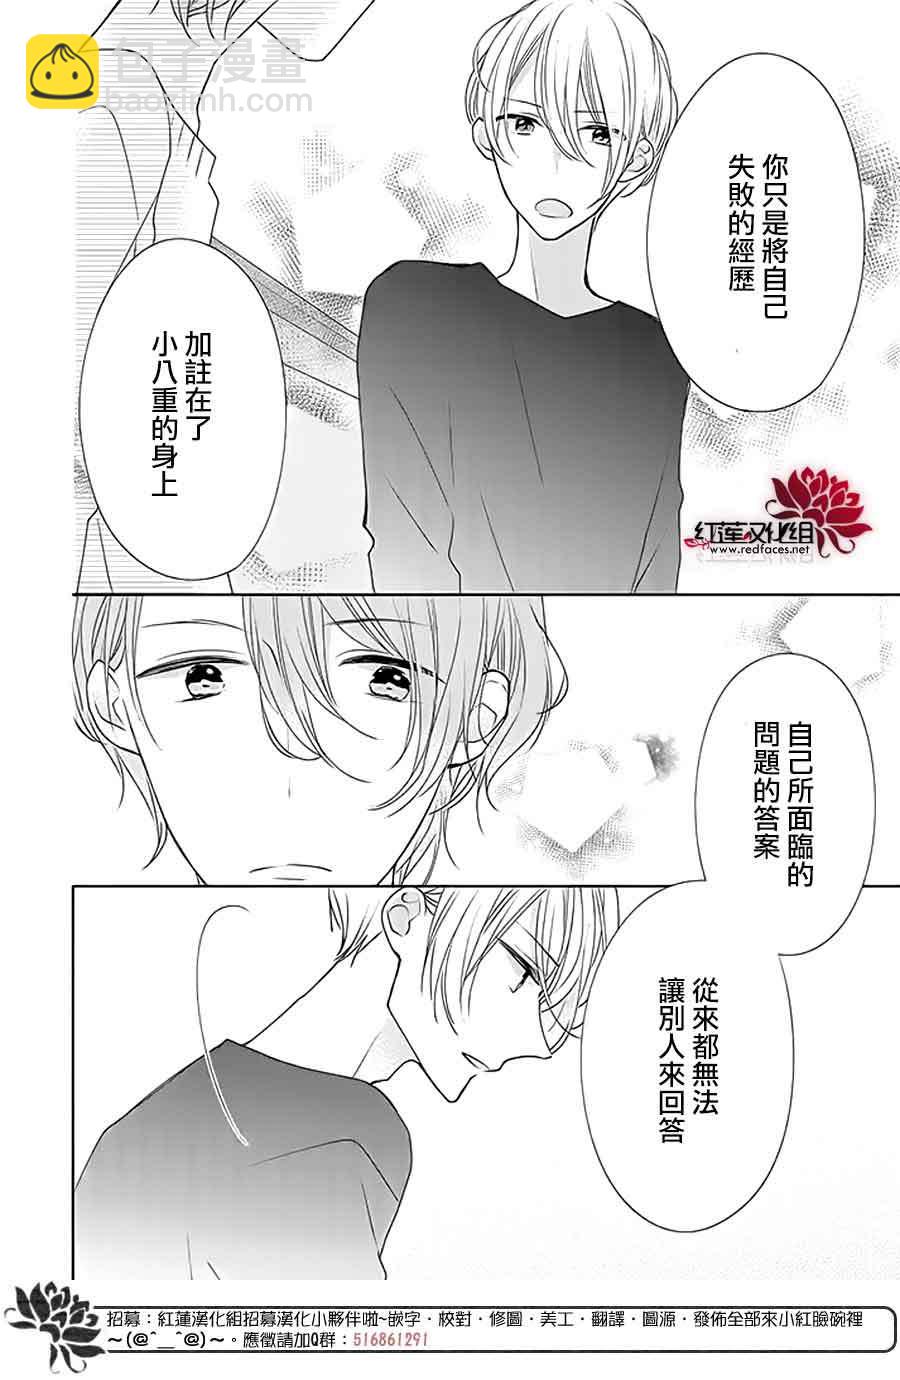 If given a second chance - 26話 - 4